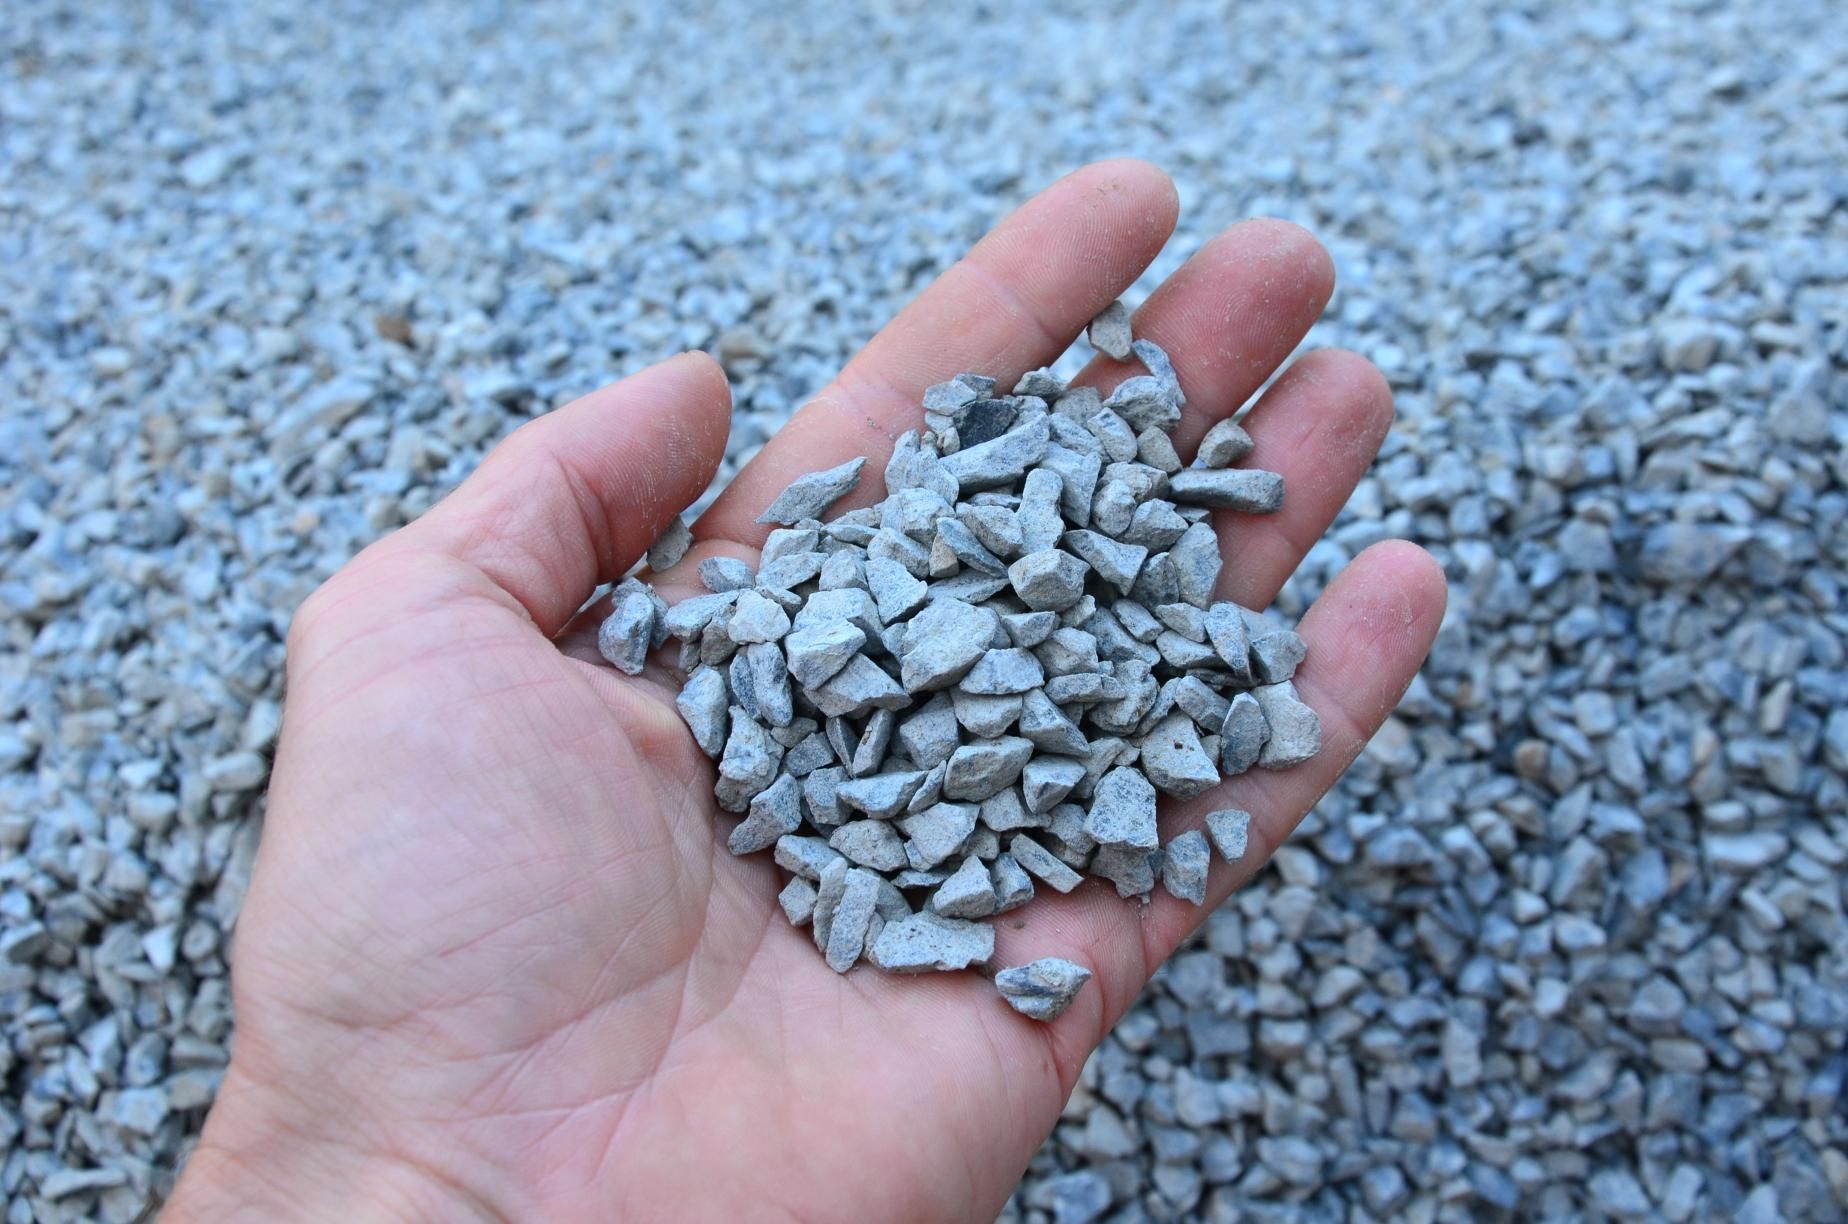 A person is holding a pile of gravel in their hand.